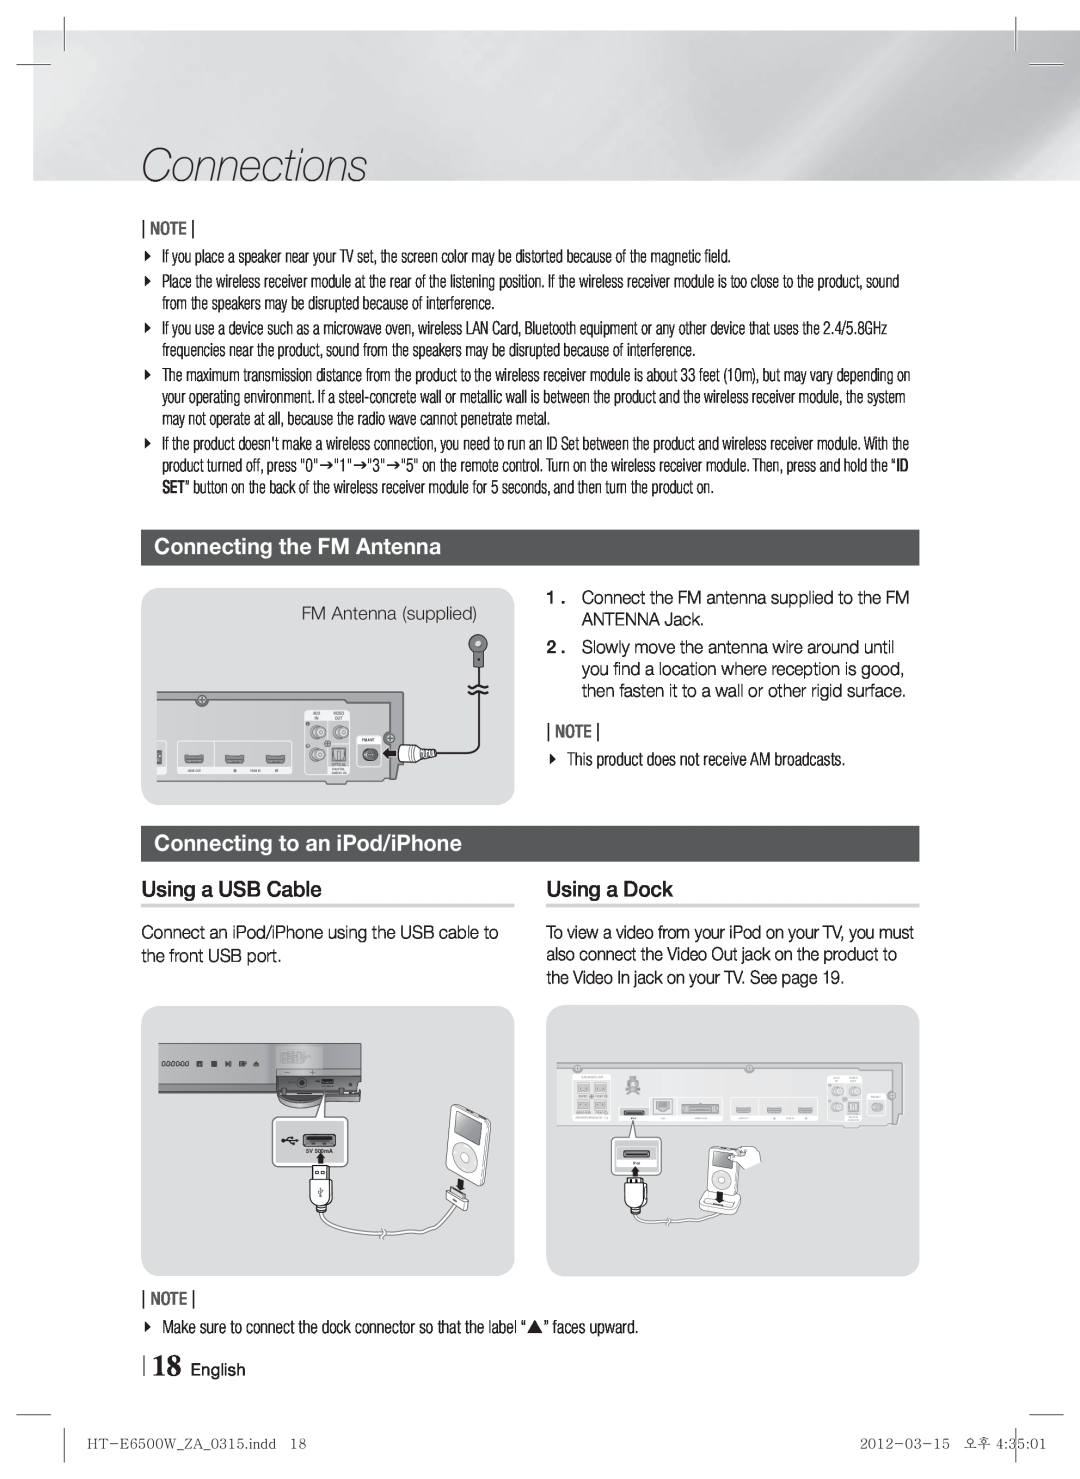 Samsung HT-E6500W, HTE6500WZA user manual Connecting the FM Antenna, Connecting to an iPod/iPhone, Connections, Note 